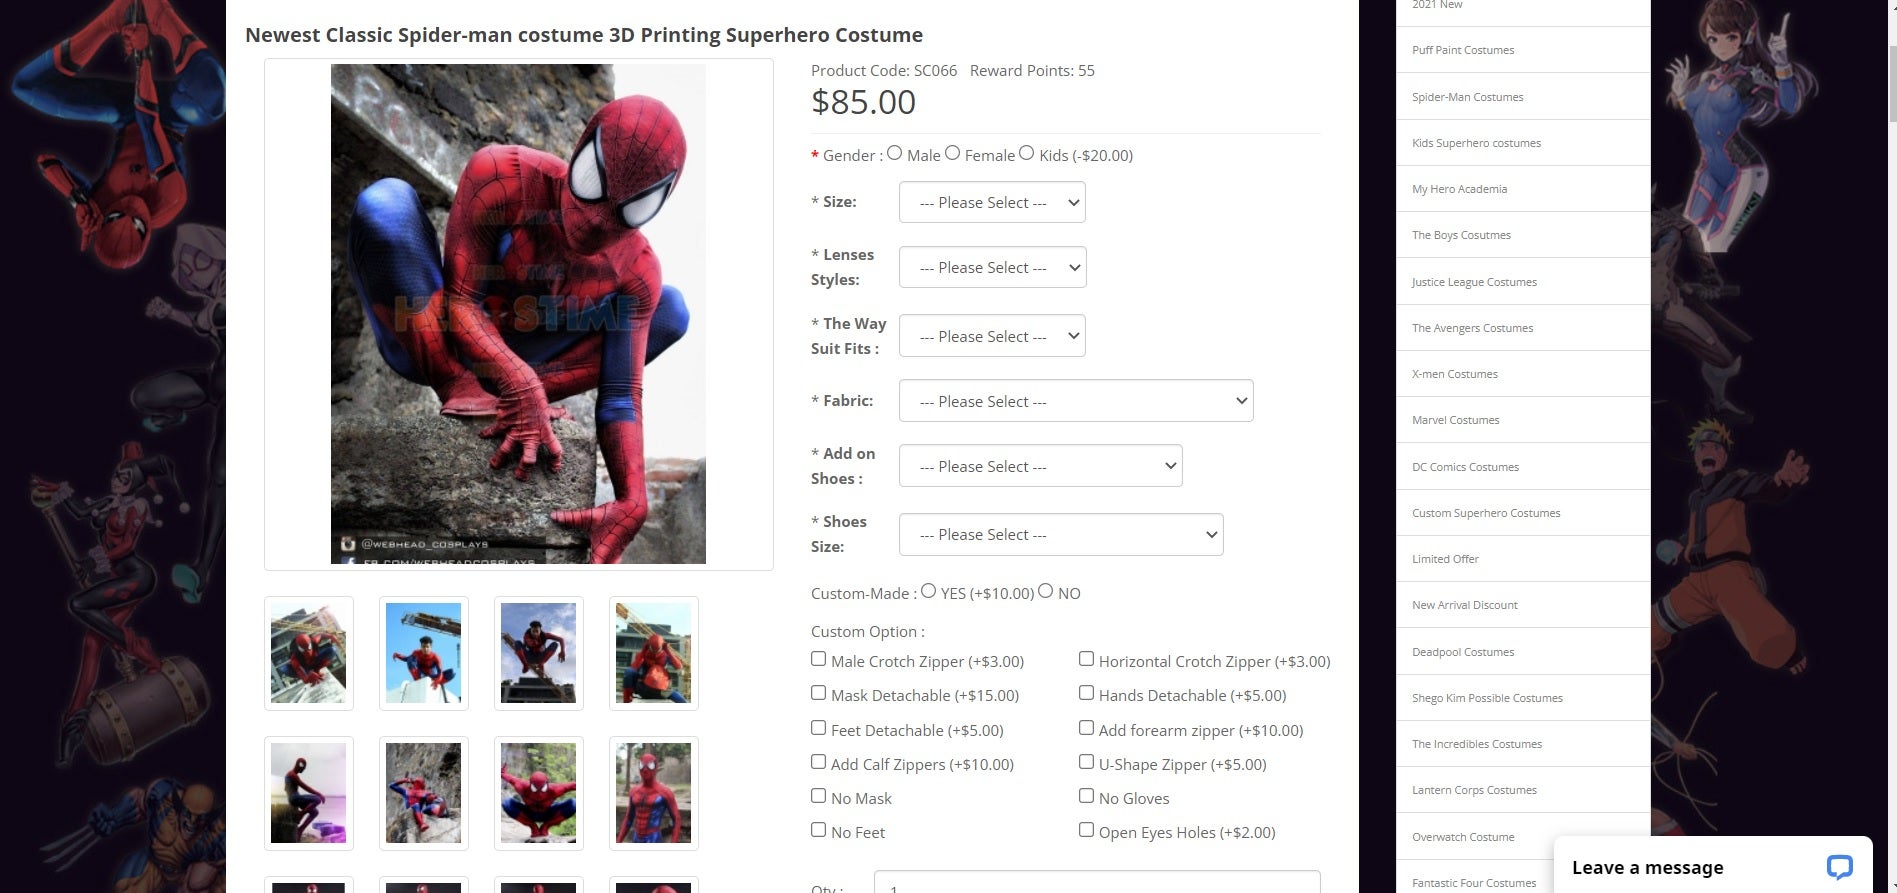 How to make your own Spider-Man costume